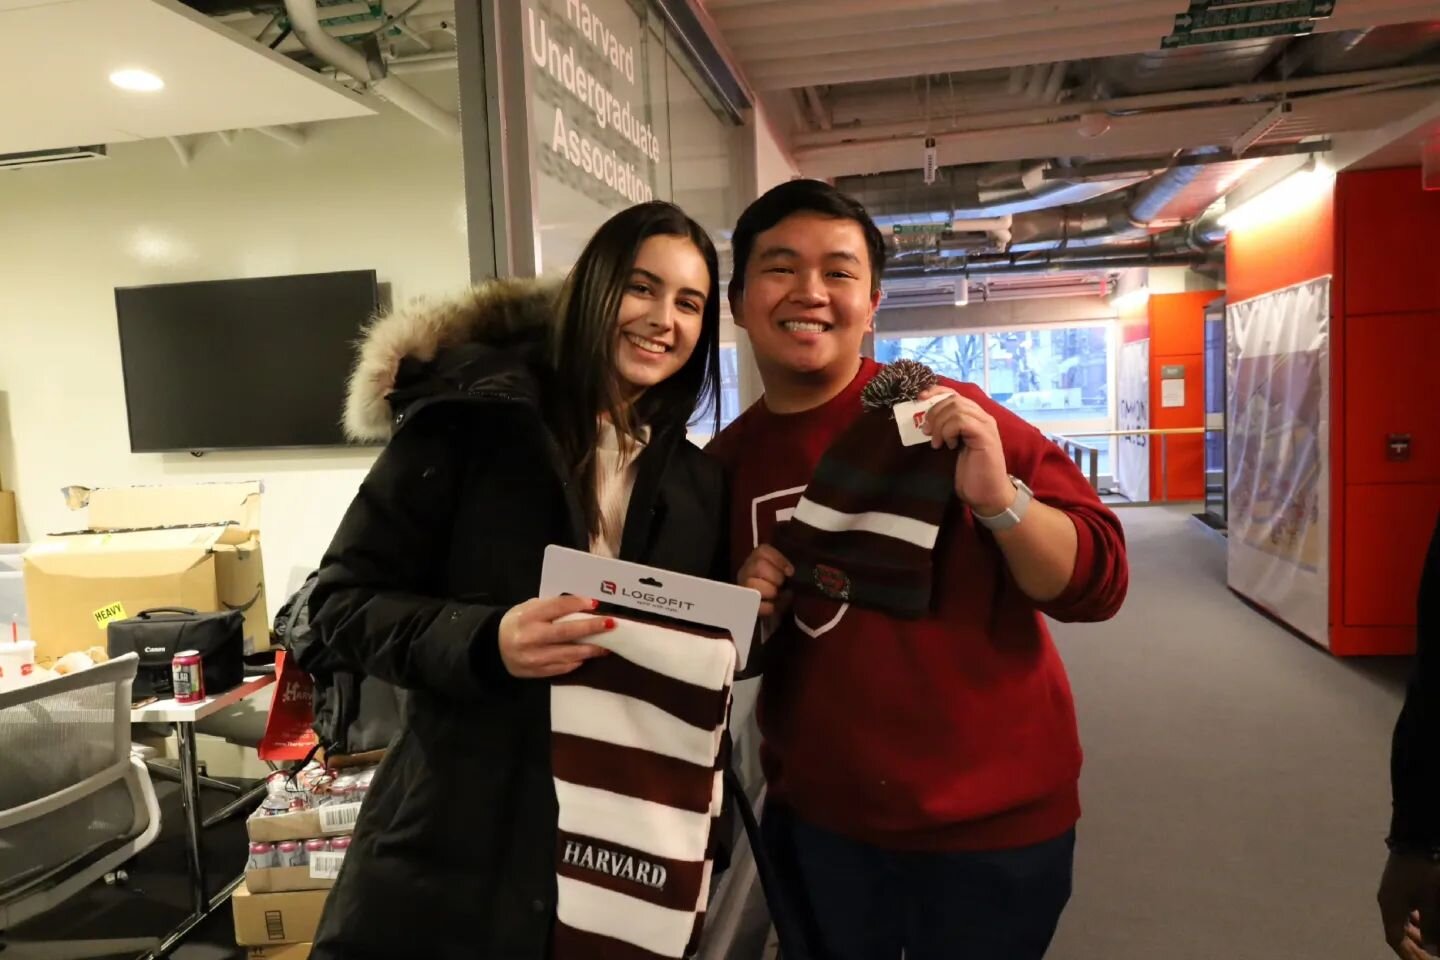 Free Harvard Merch Giveaway! 🏈🥳 We ran out super quickly yesterday, but we hope you're excited to cheer on Harvard at the game today! #rollcrim 🟥📣

#harvard&nbsp;#harvarduniversity&nbsp;#harvardcollege&nbsp;#harvard2026&nbsp;#harvard2025&nbsp;#ha